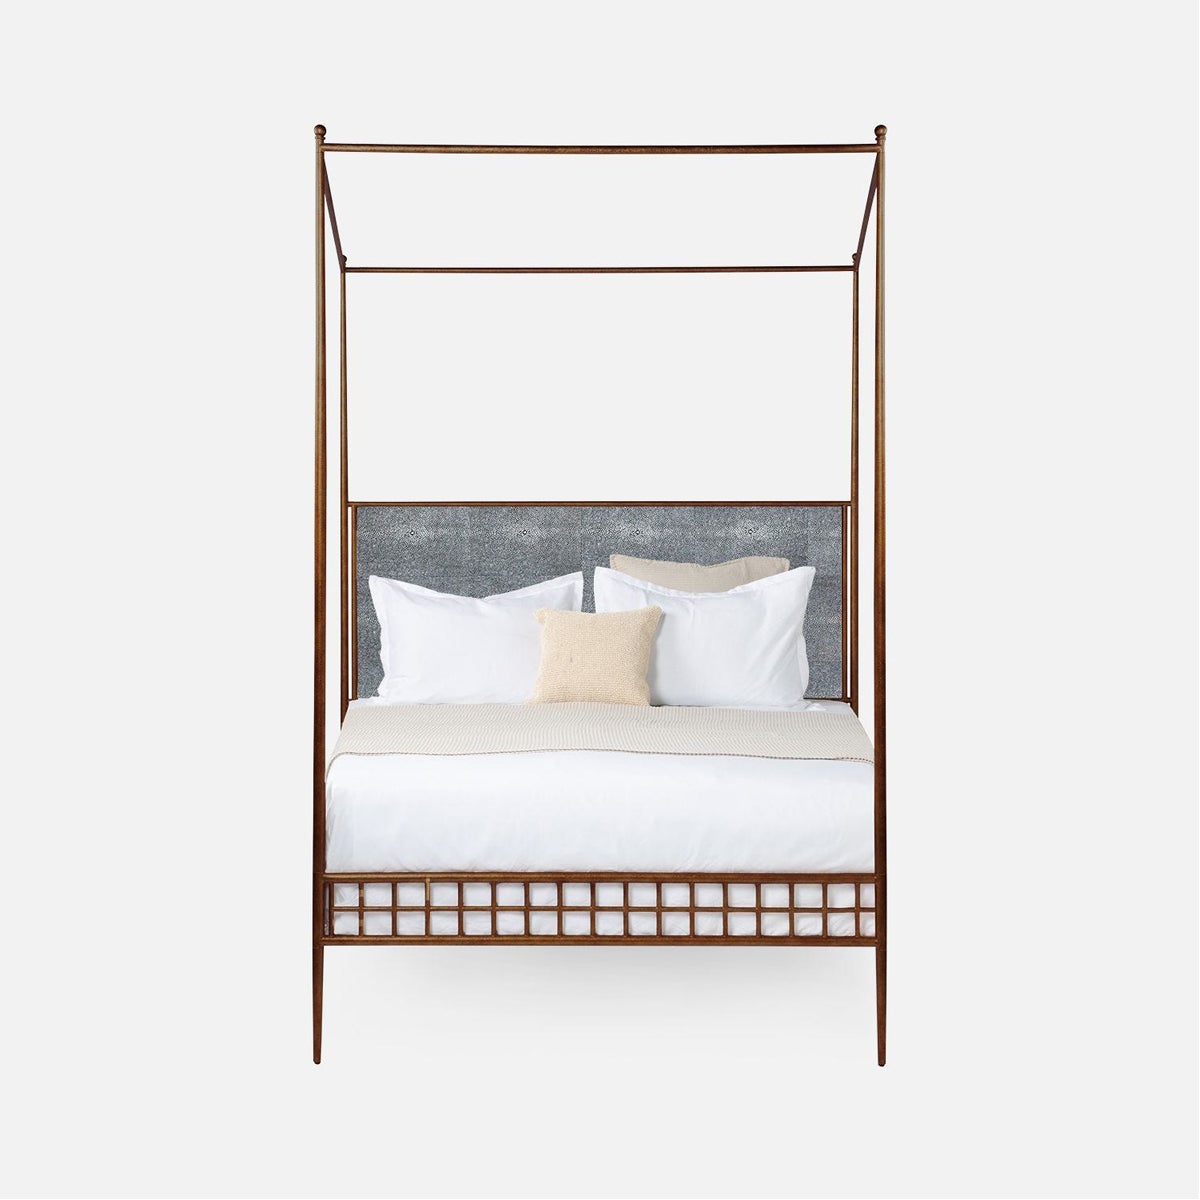 Made Goods Hamilton Textured Iron Canopy Bed in Nile Fabric